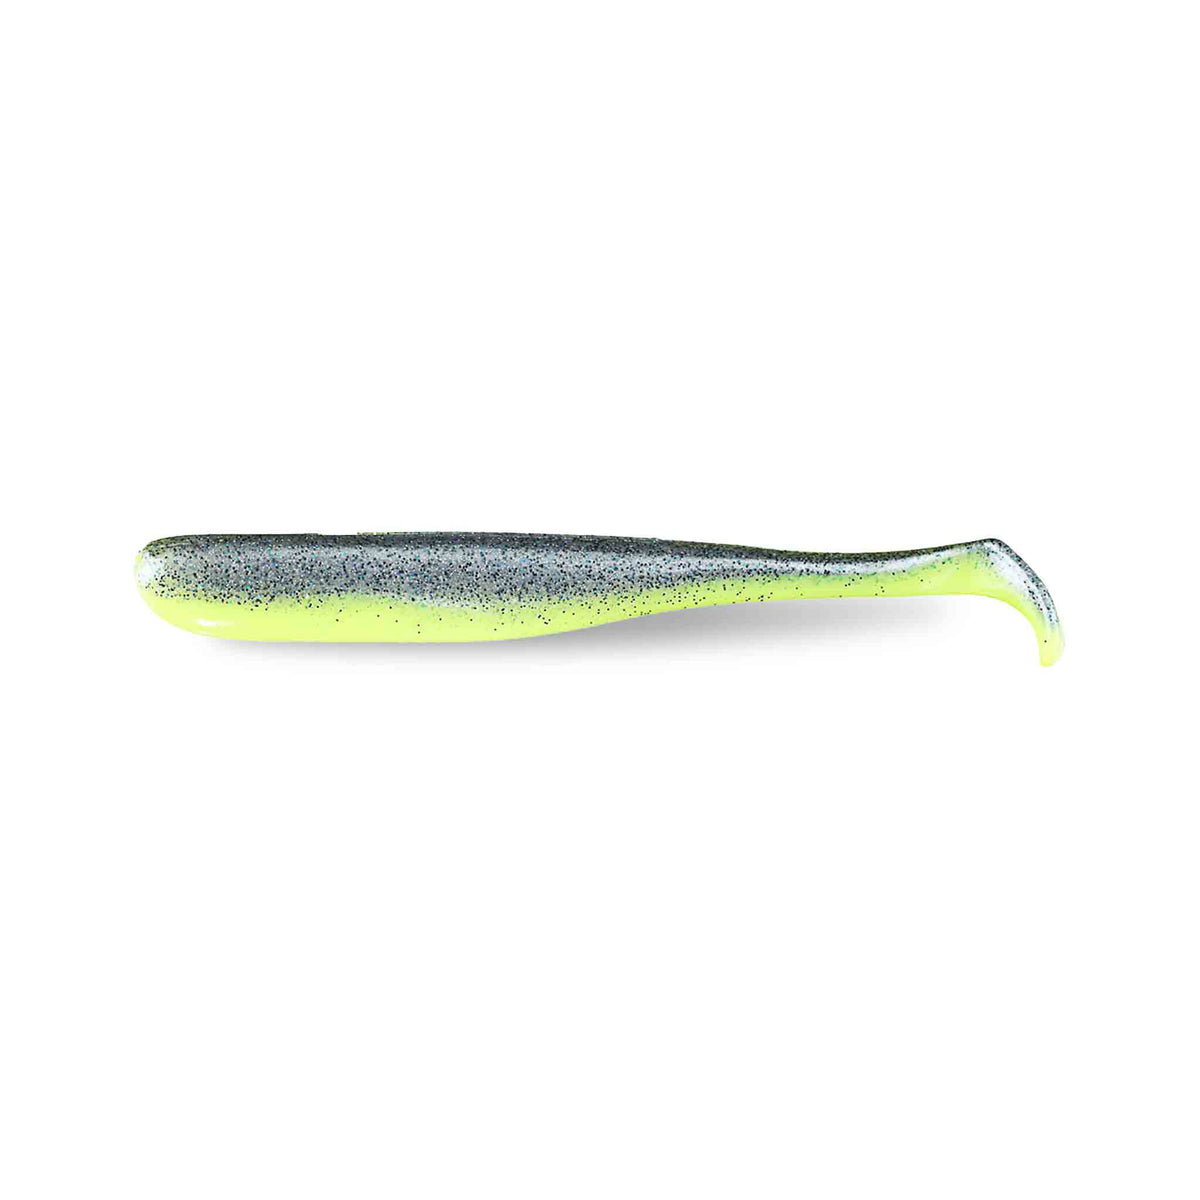 View of Rubber Z-Man Mag SwimZ 8" Swimbait Sexy Mullet available at EZOKO Pike and Musky Shop